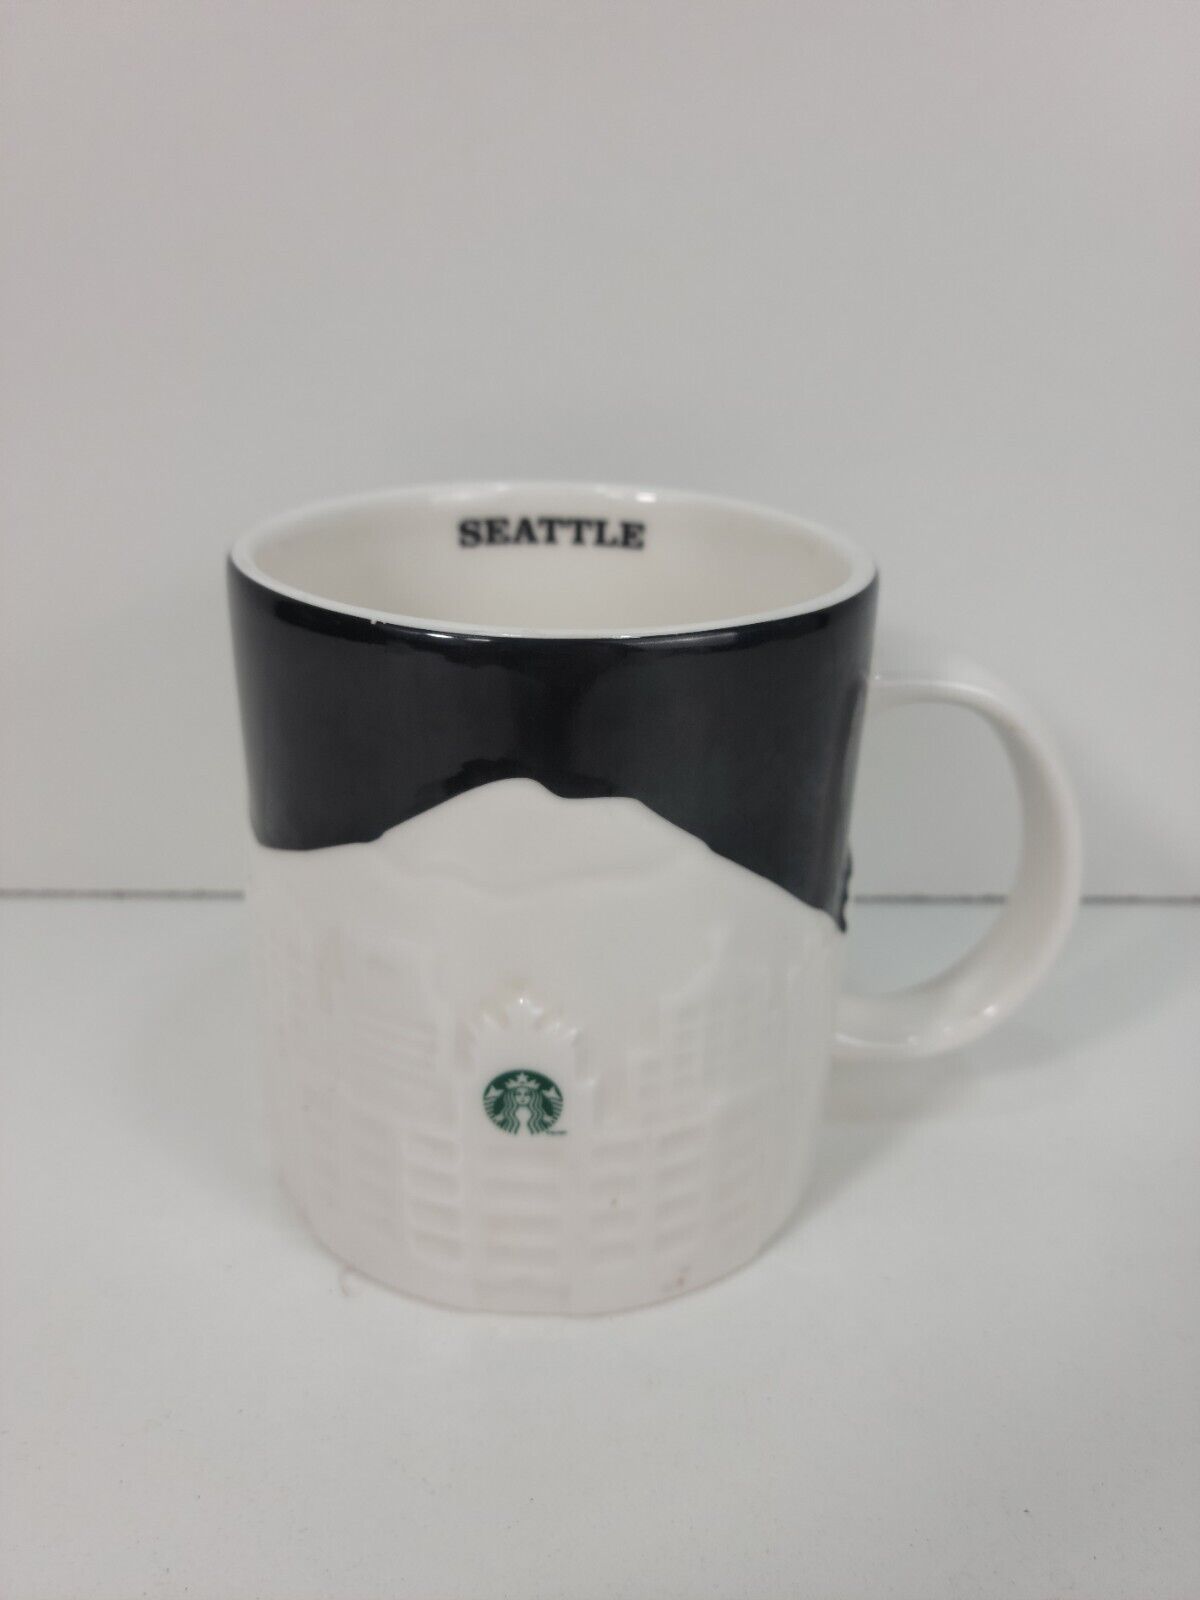 Starbucks Mug Seattle City 3D Relief Collector Series 2012 Coffee Cup 16oz 